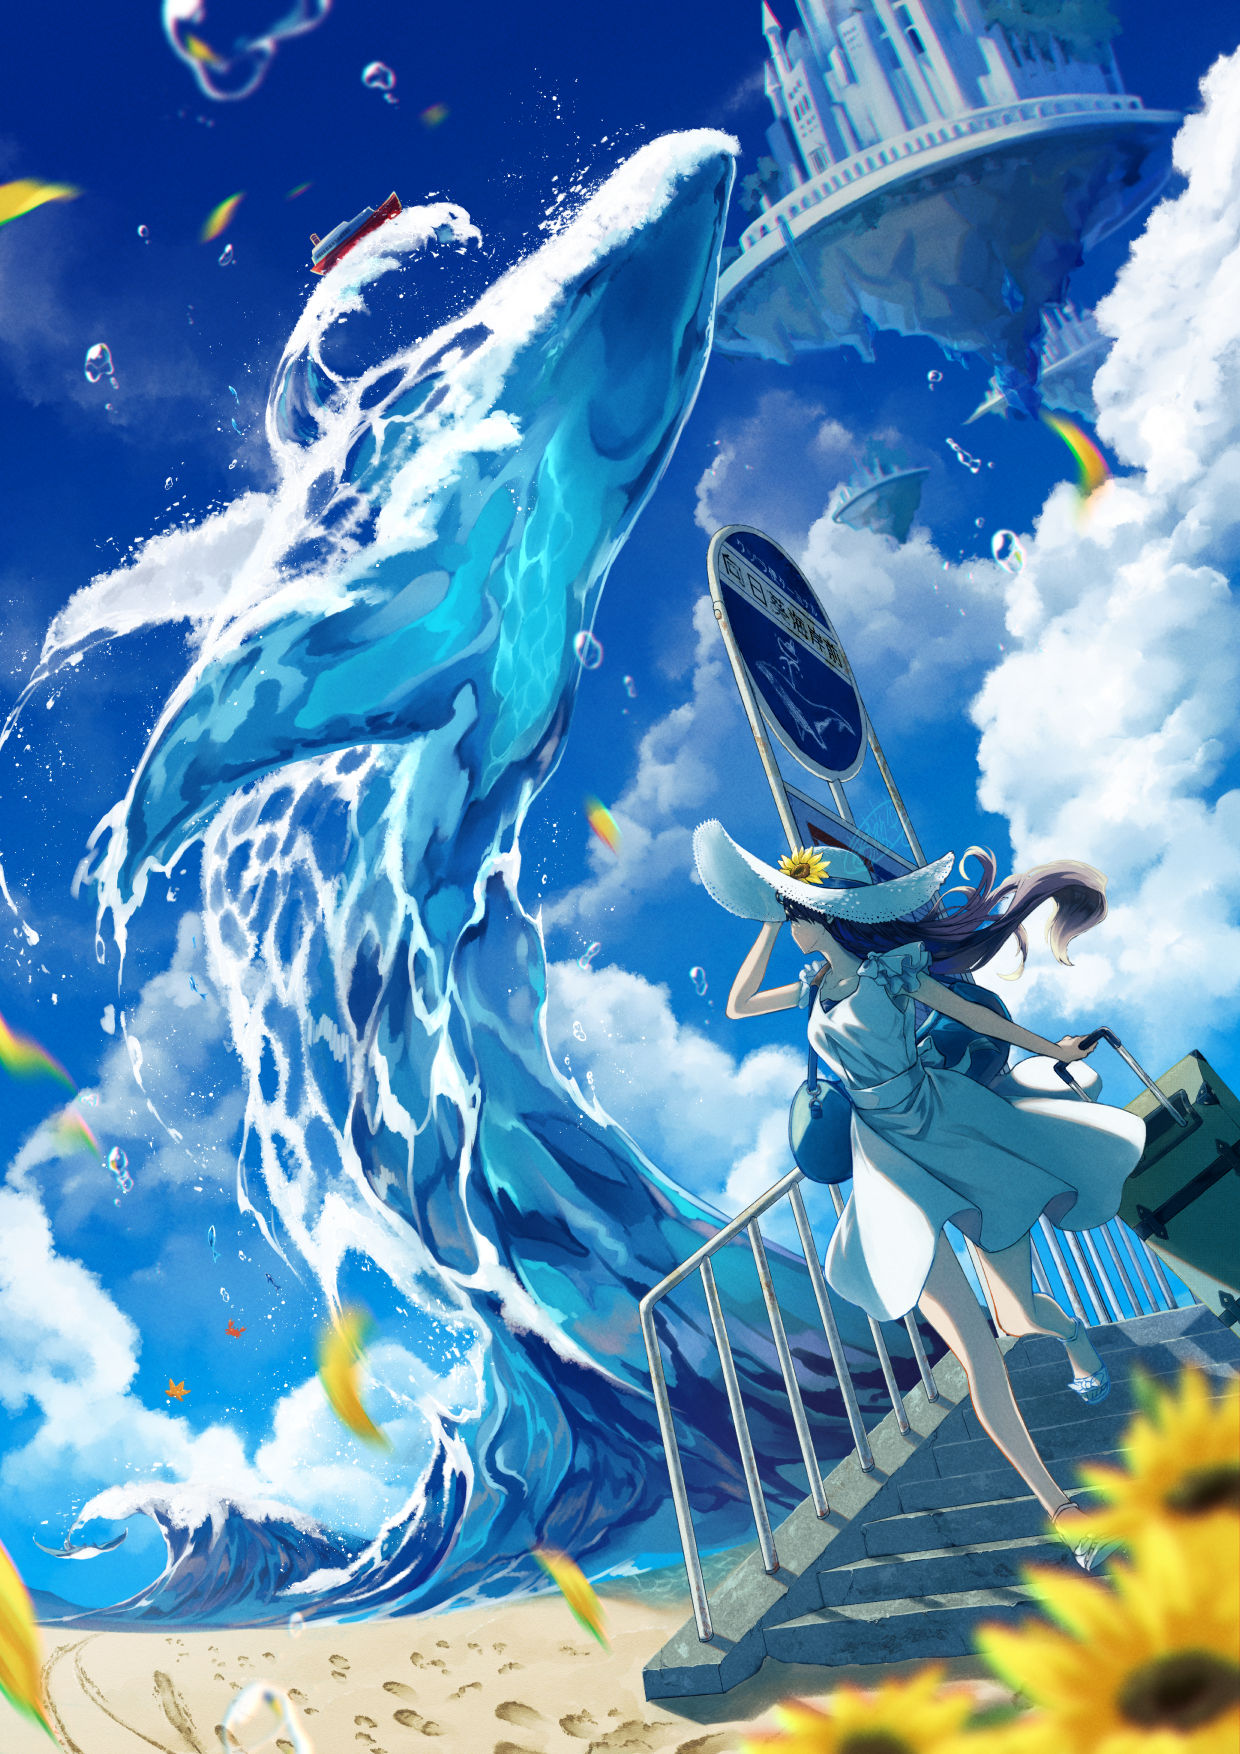 Anime 1240x1754 anime anime girls Pixiv portrait display sun hats whale water sky animals stairs sunflowers leaves water drops sand looking away walking floating Canned Rose